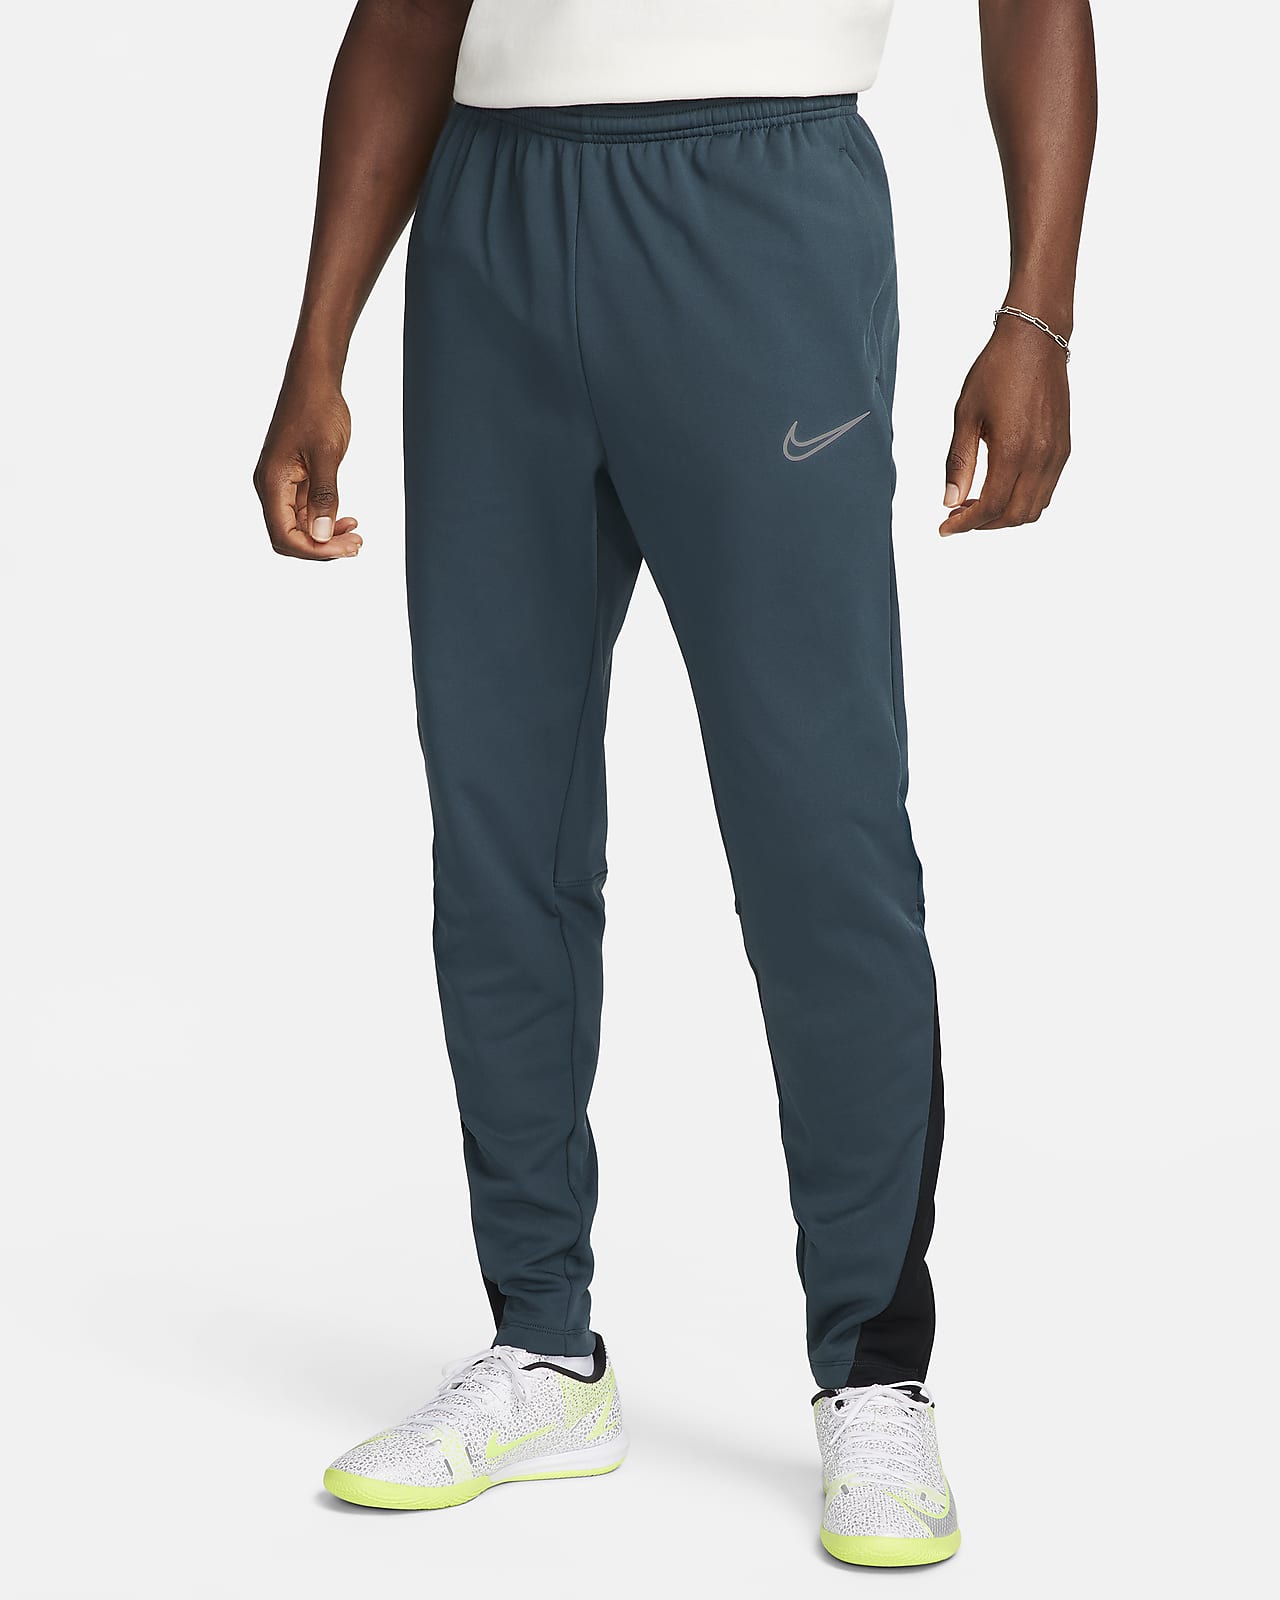 Nike Academy Winter Warrior Men's Therma-FIT Football Pants